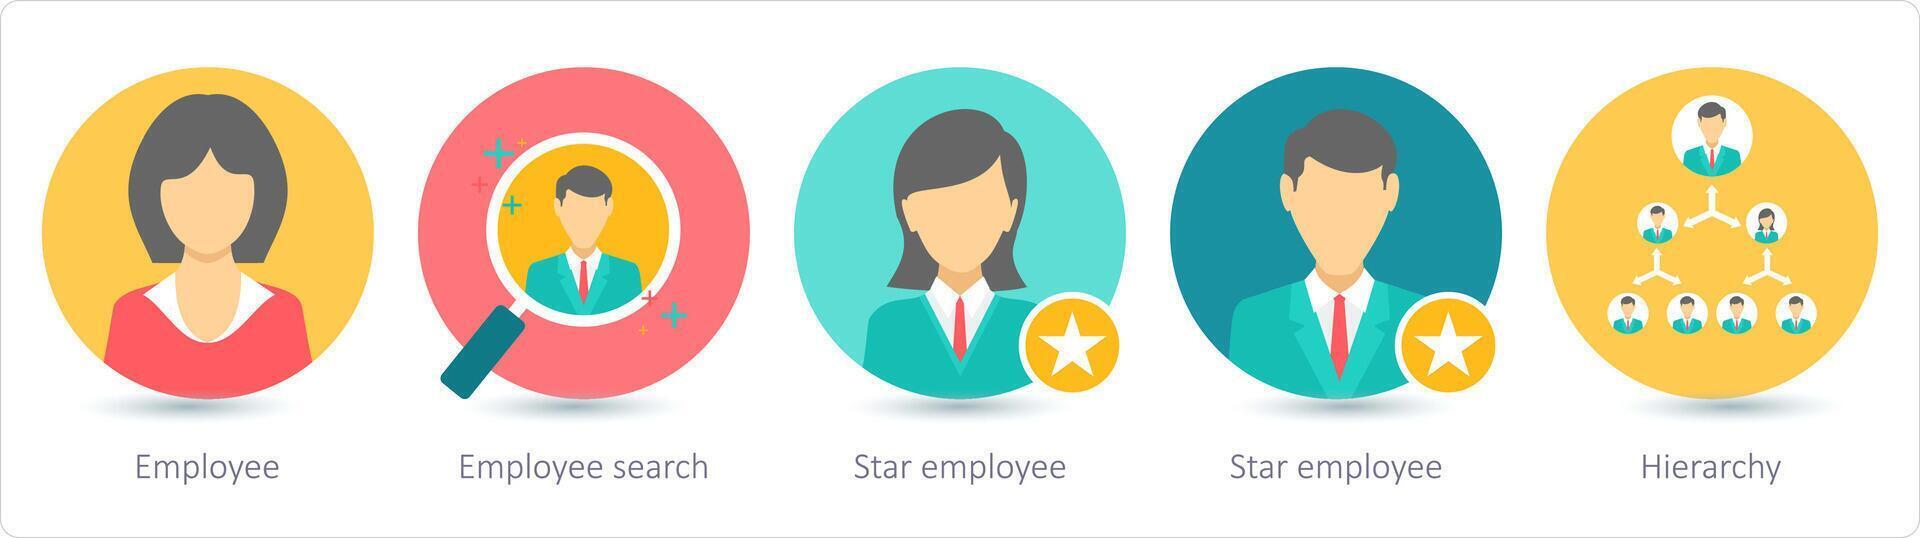 A set of 5 business icons as employee, employee search, star employee vector